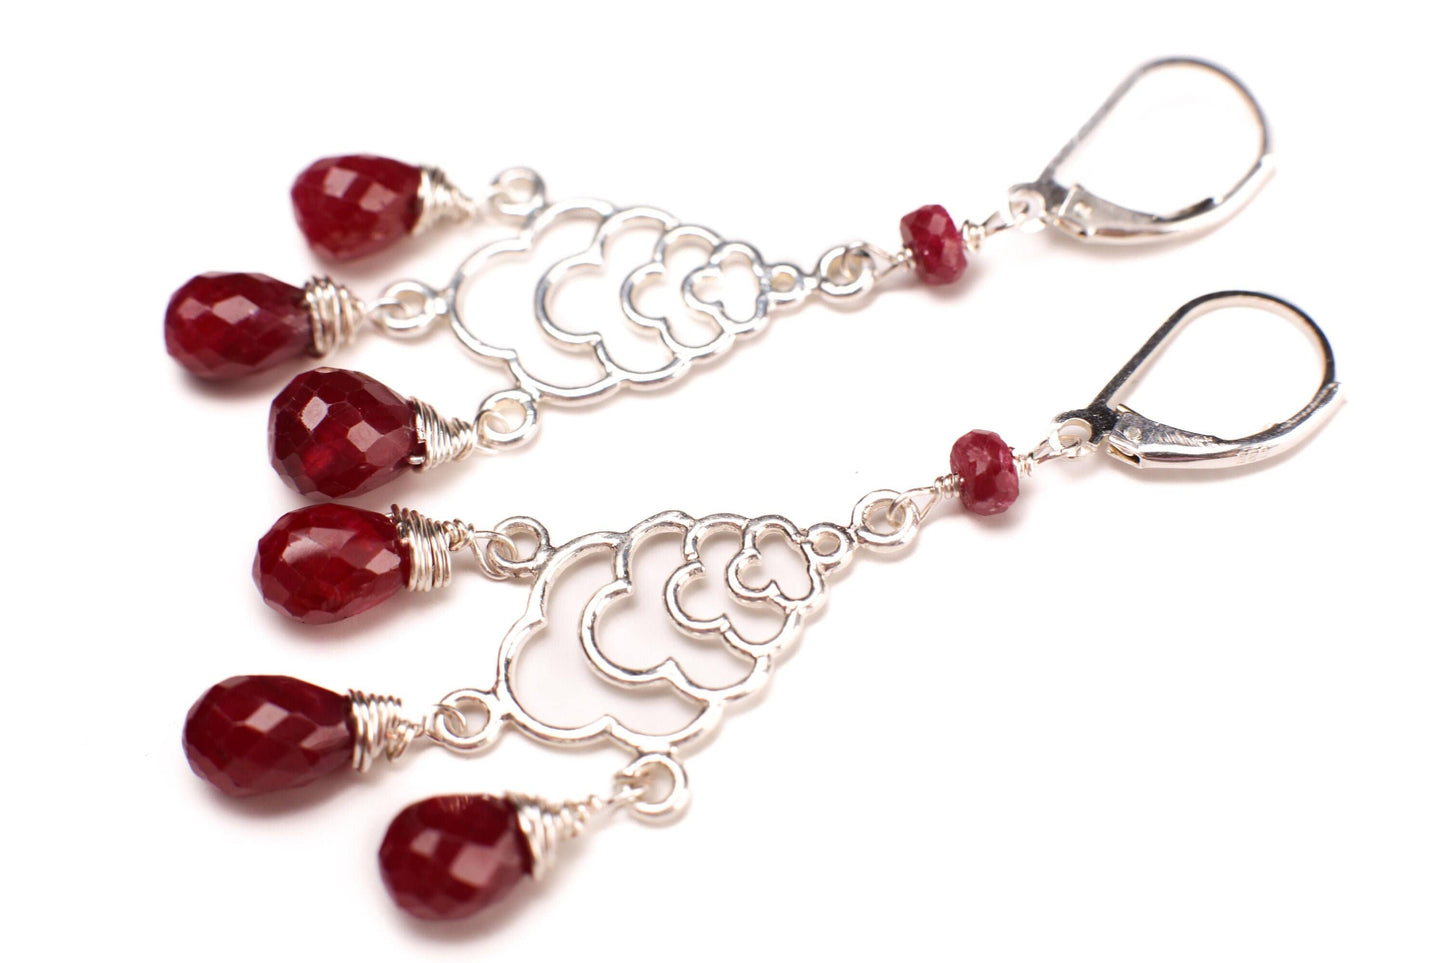 Genuine Ruby Wire Wrapped Dangling Briolette Earrings in 925 Sterling Silver Chandelier and Leverback Earwire, Bridal, Boho, Handmade Gift